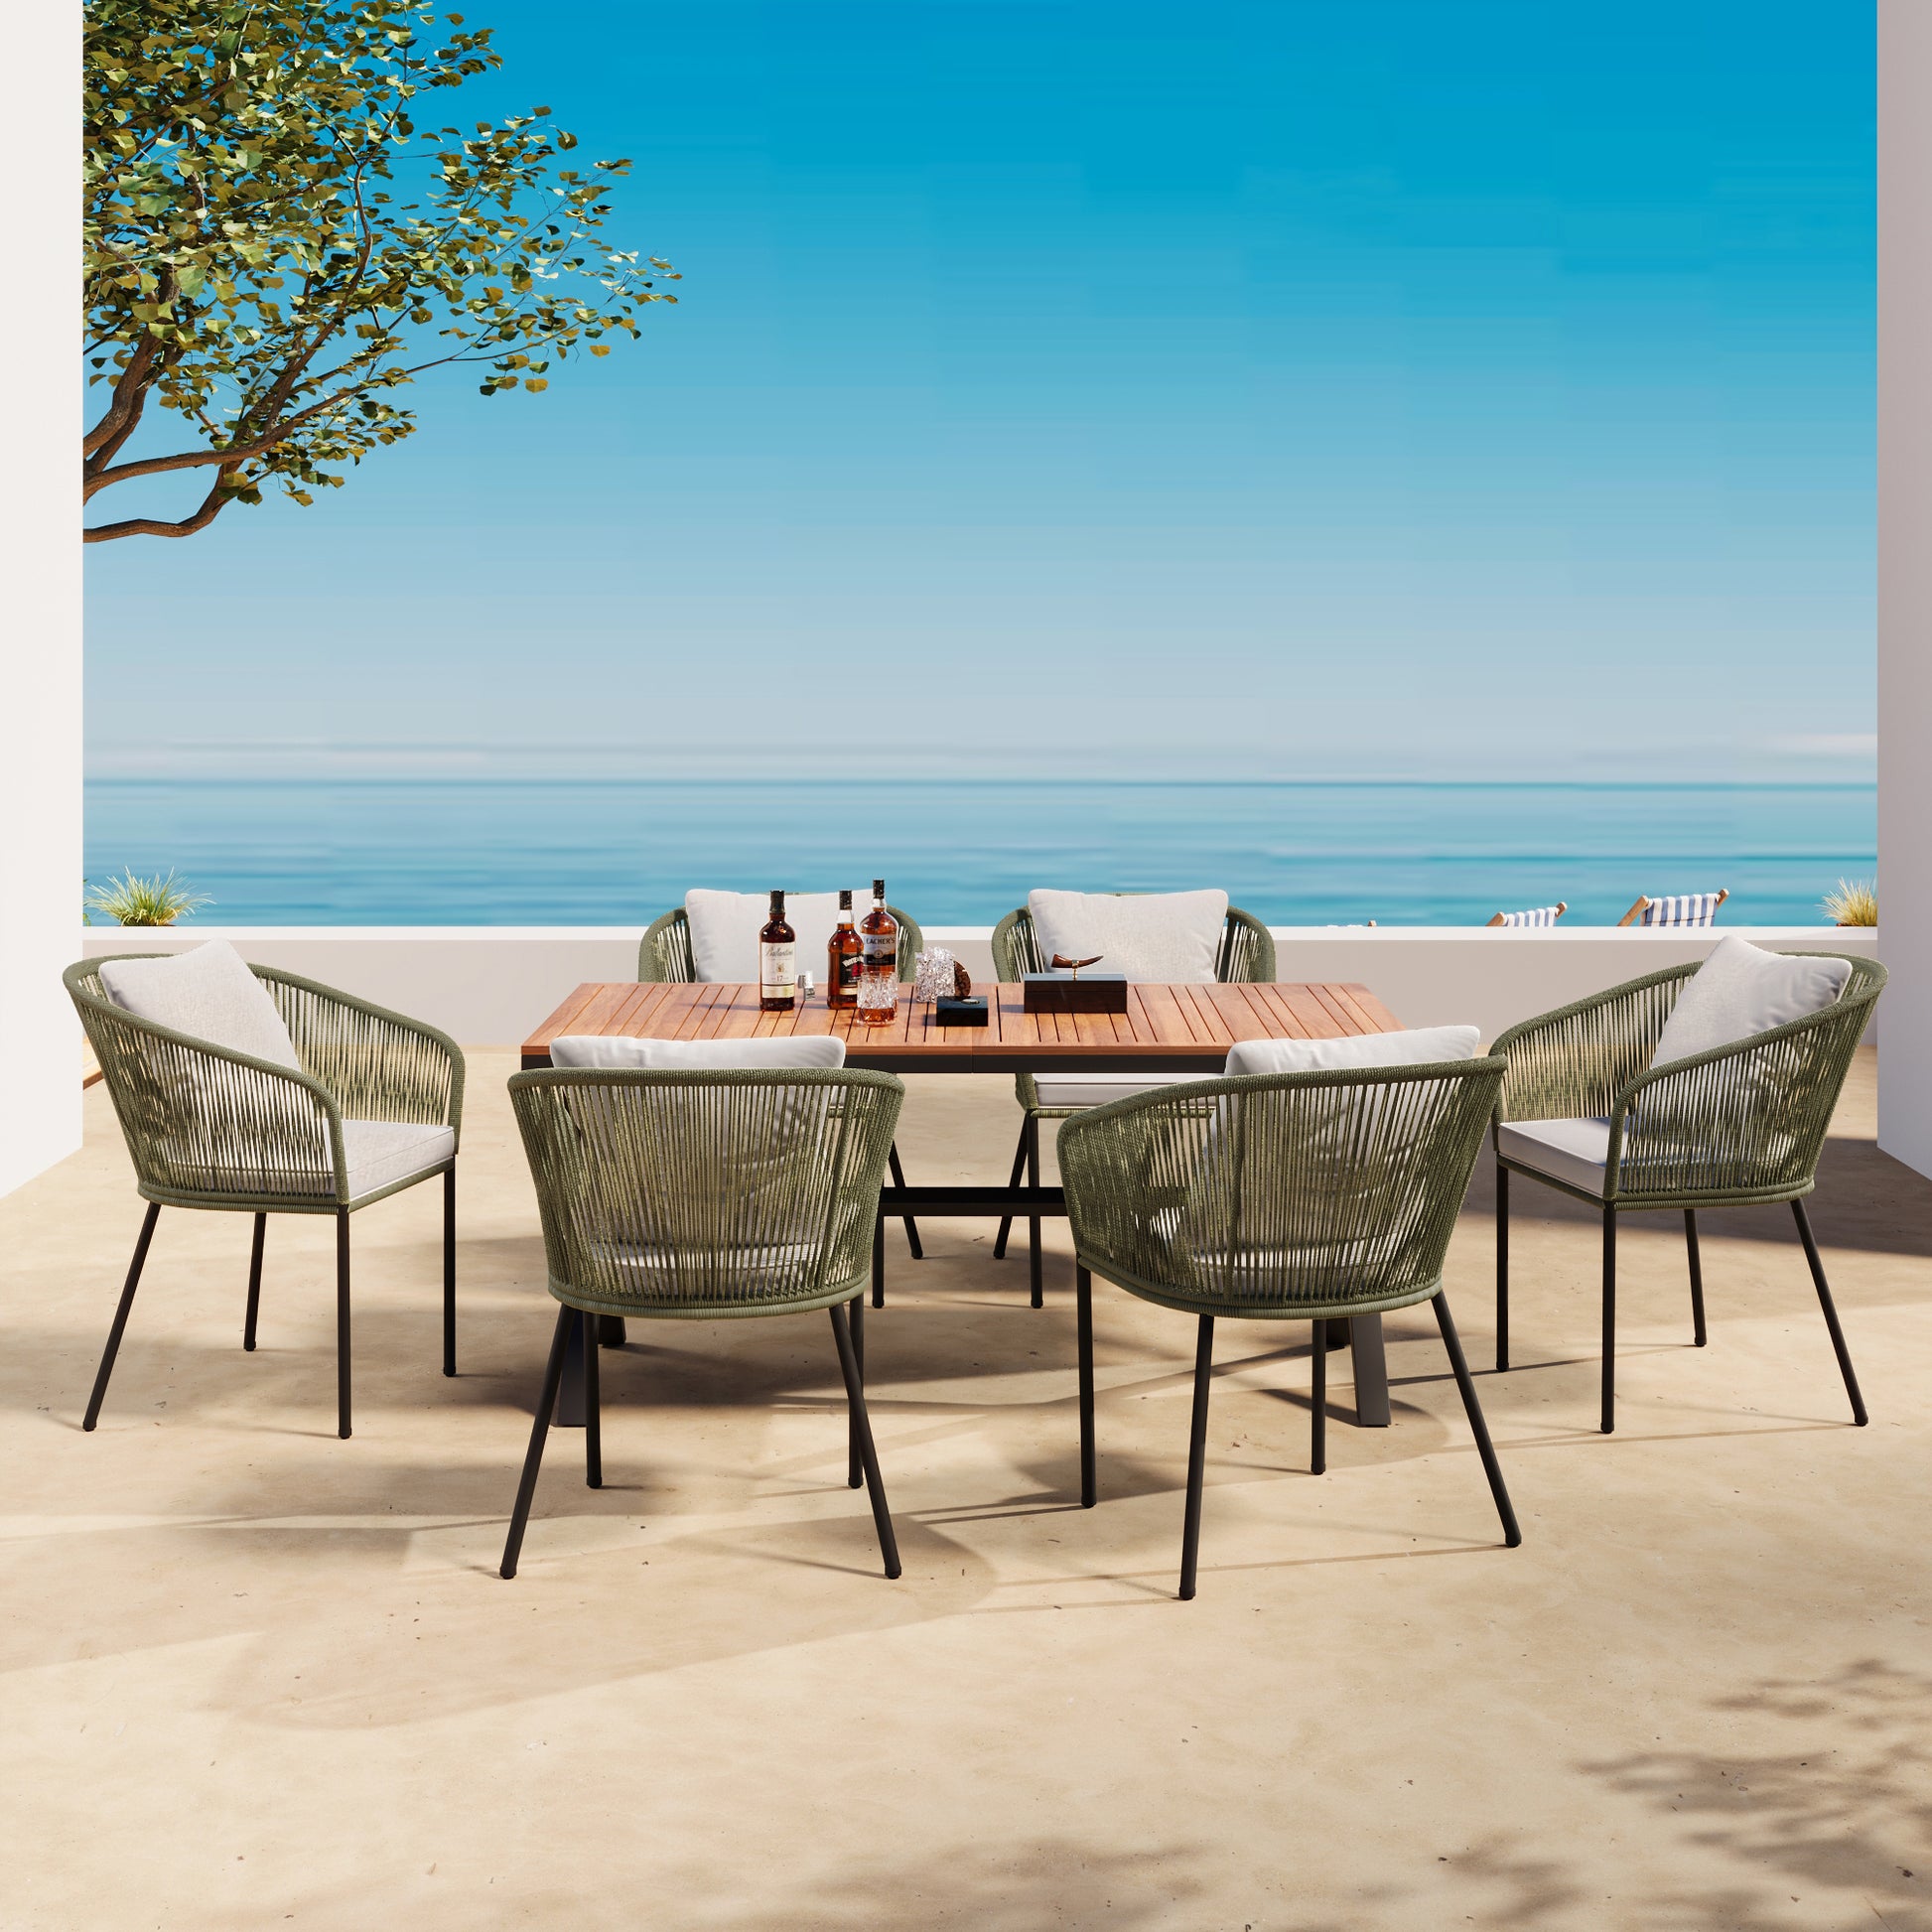 7 Pieces Patio Dining Set, All-Weather Outdoor, Dining Table, Chairs